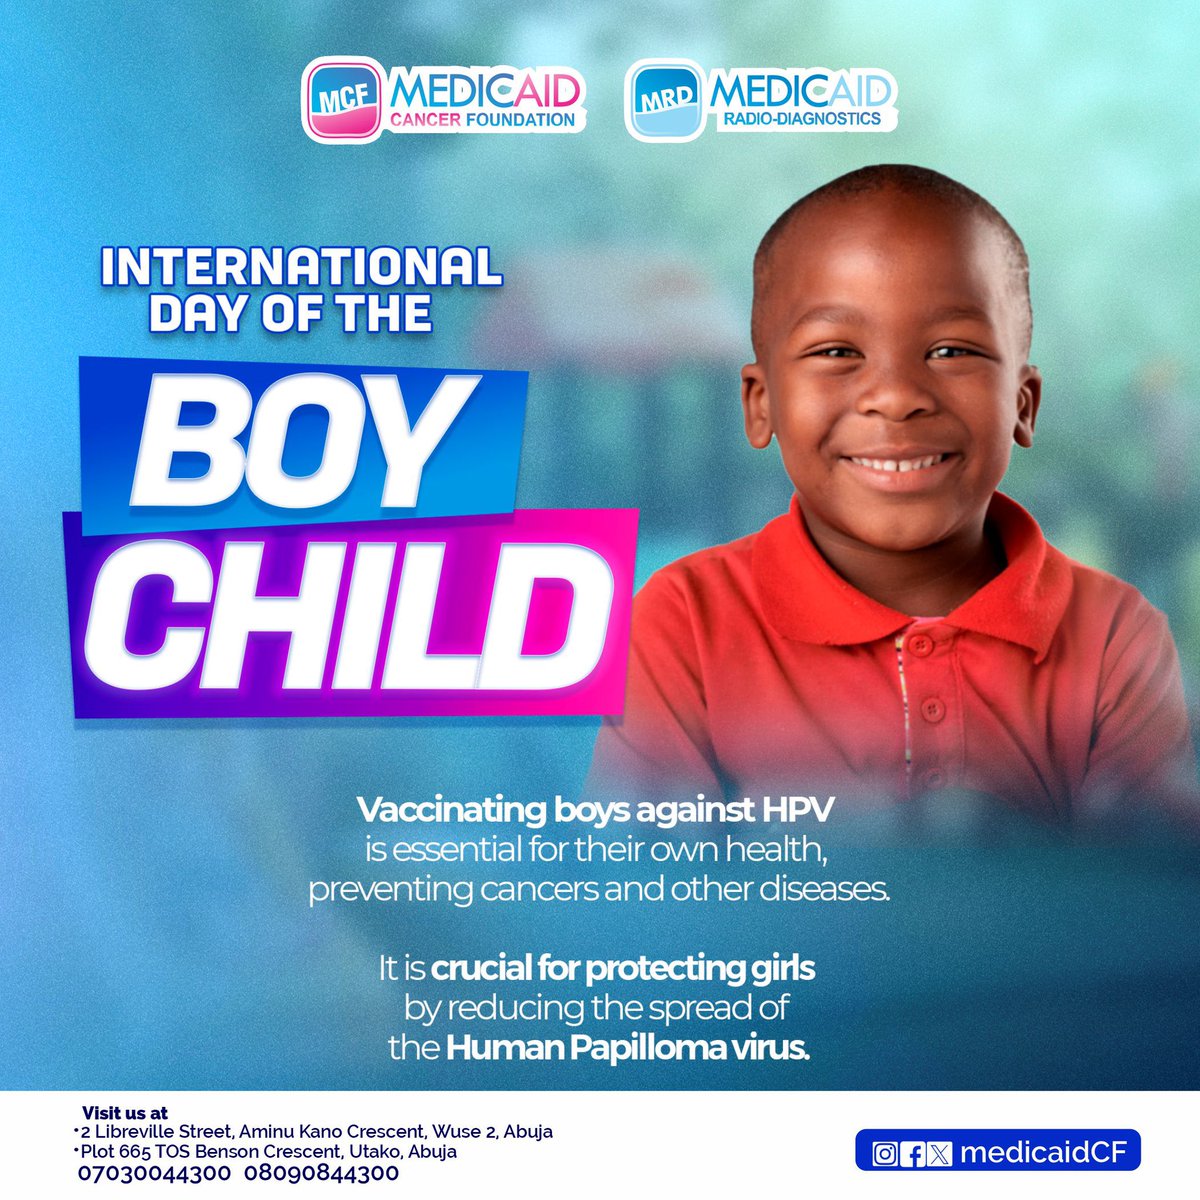 Happy International Day of the Boy Child! 'Vaccinating boys against HPV is essential for their own health, preventing cancers and other diseases. It is crucial for protecting girls by reducing the spread of the virus, fostering a healthier future for everyone.' Vaccines are